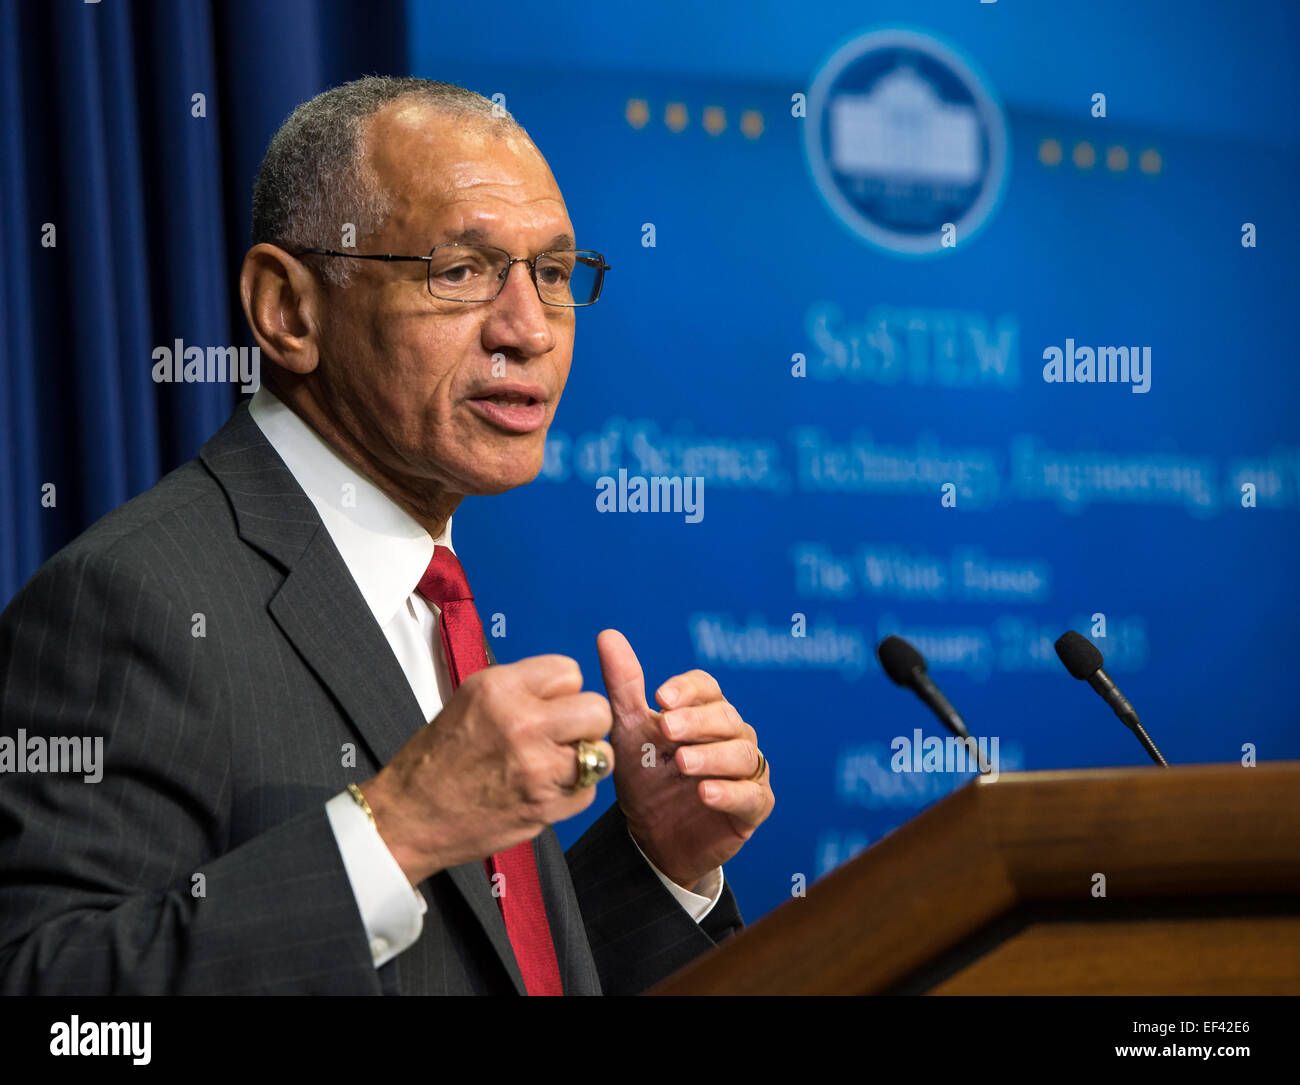 NASA Administrator Charles Bolden speaks during the annual White House State of Science, Technology, Engineering, and Math (SoSTEM) address, Wednesday, Jan. 21, 2015, in the South Court Auditorium in the Eisenhower Executive Office Building on the White House complex in Washington. Stock Photo